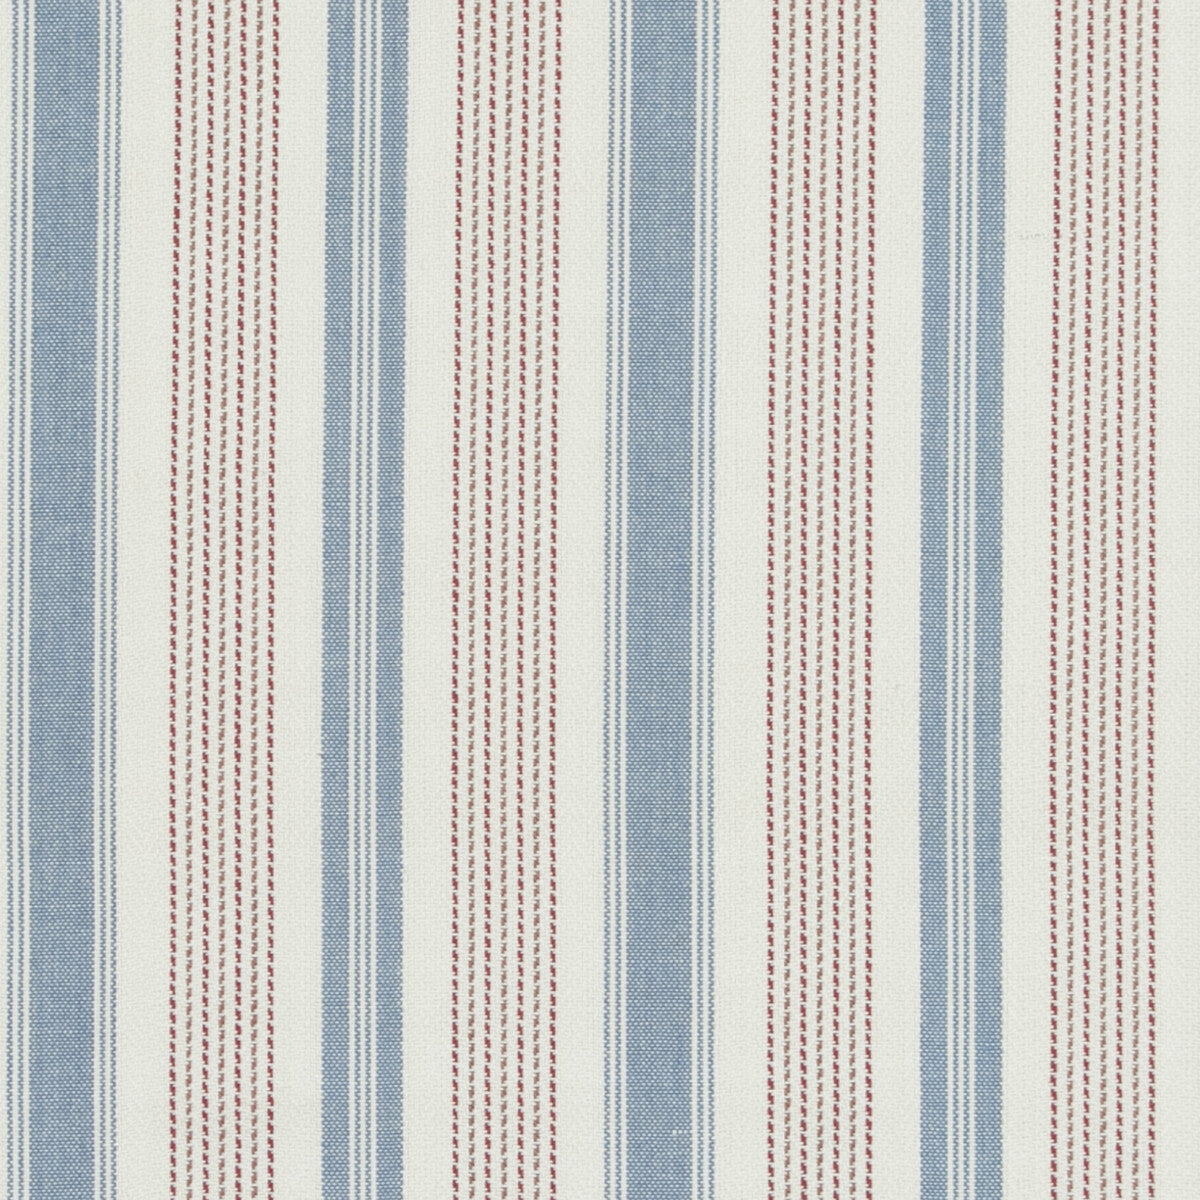 Purbeck Stripe fabric in red/blue color - pattern PF50507.4.0 - by Baker Lifestyle in the Bridport collection